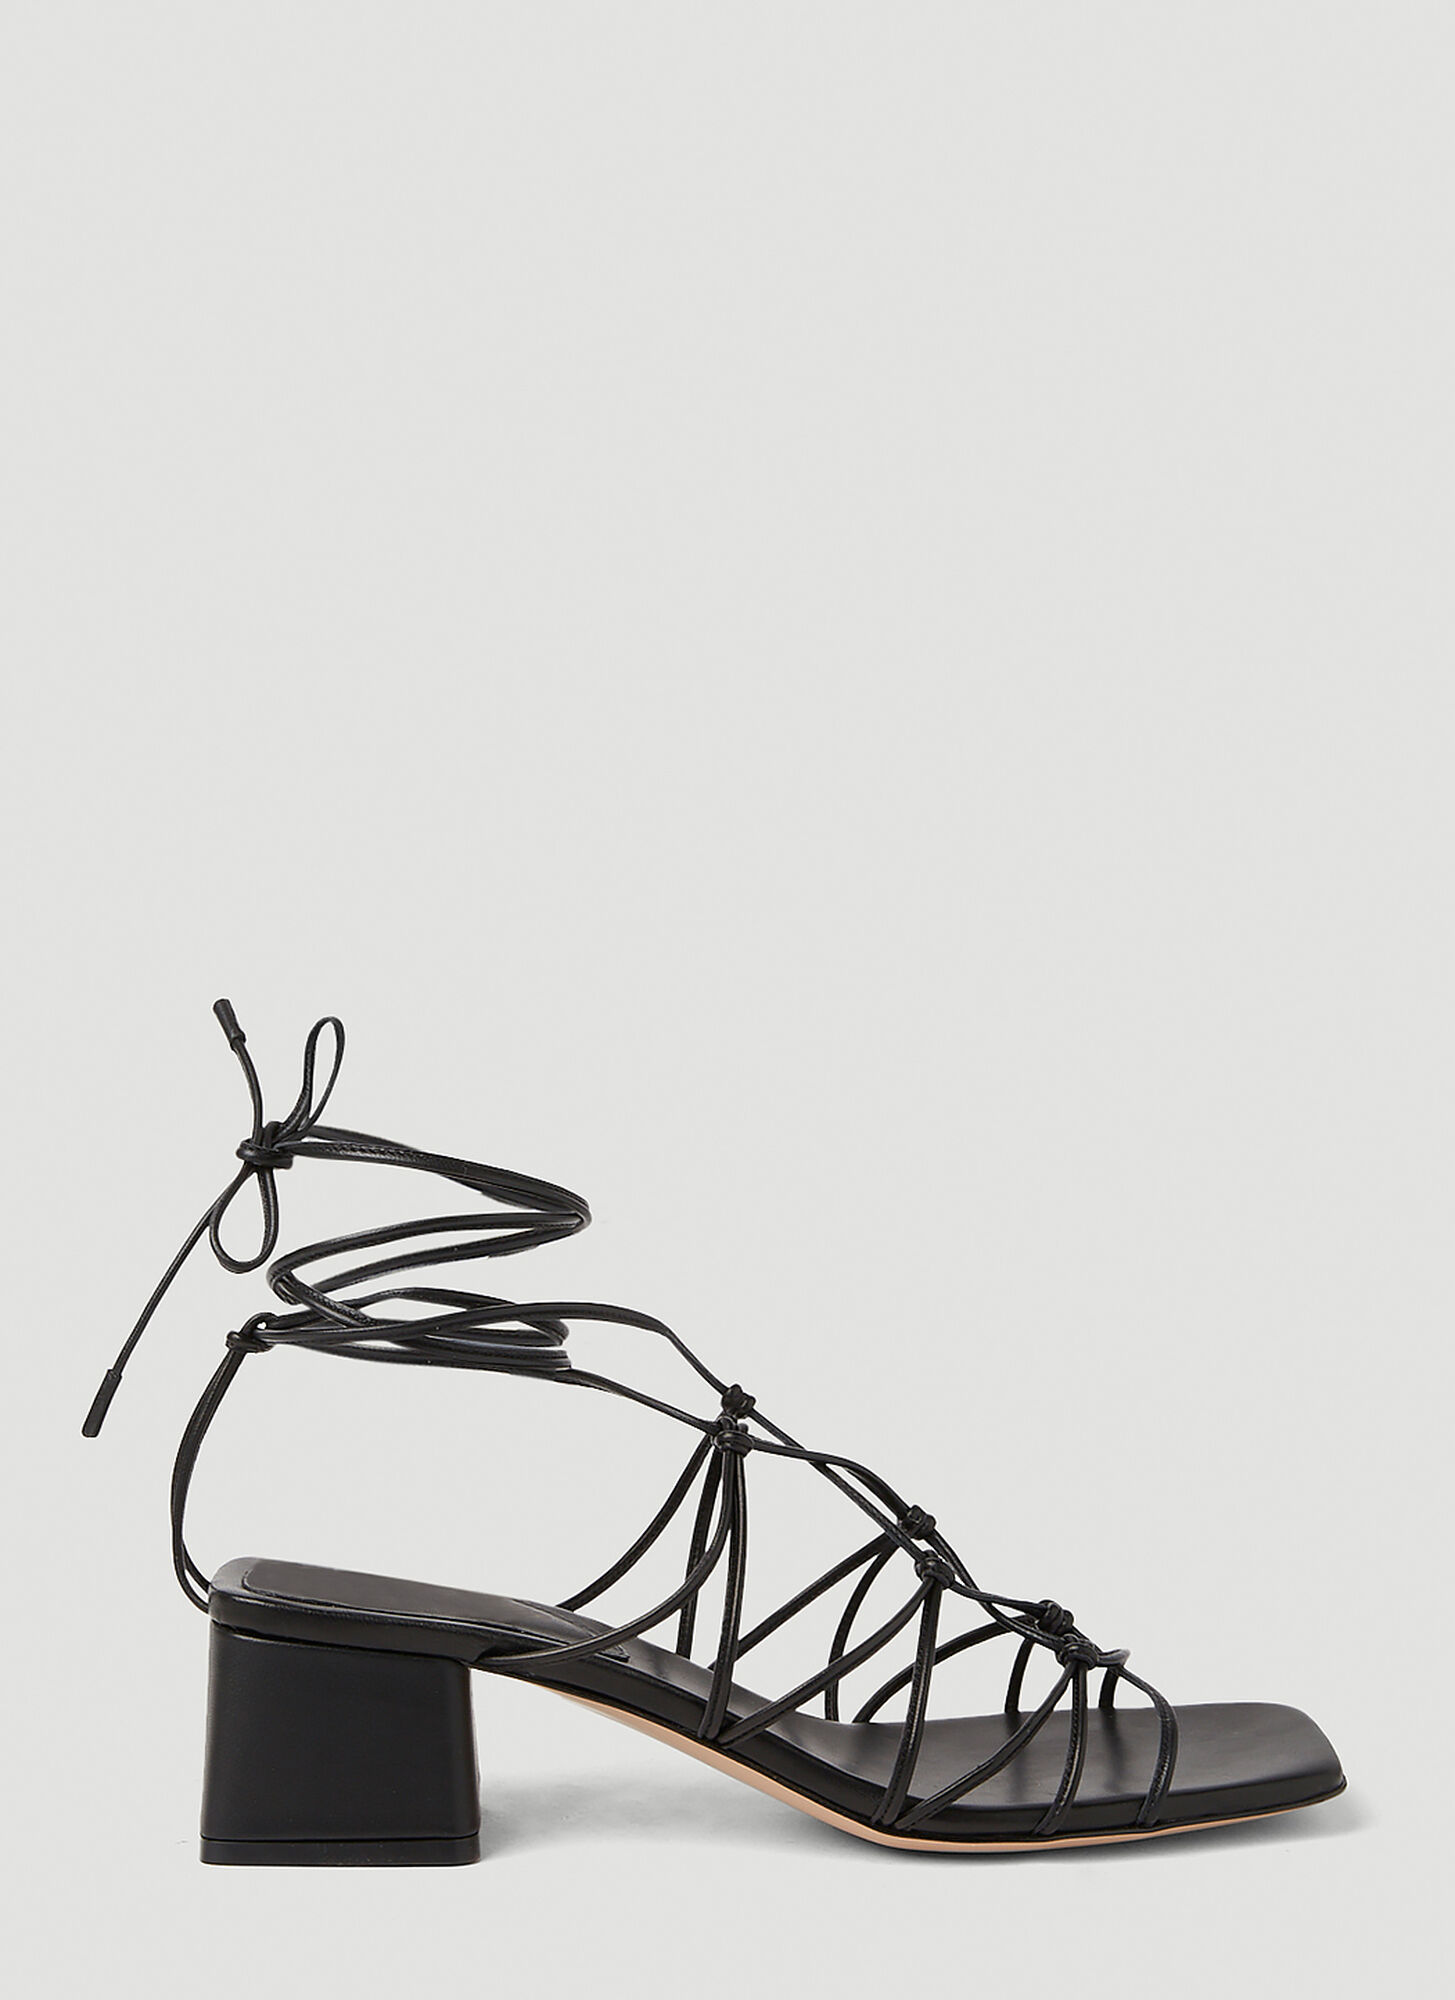 Gianvito Rossi Knot Strap Heeled Sandals Female Black